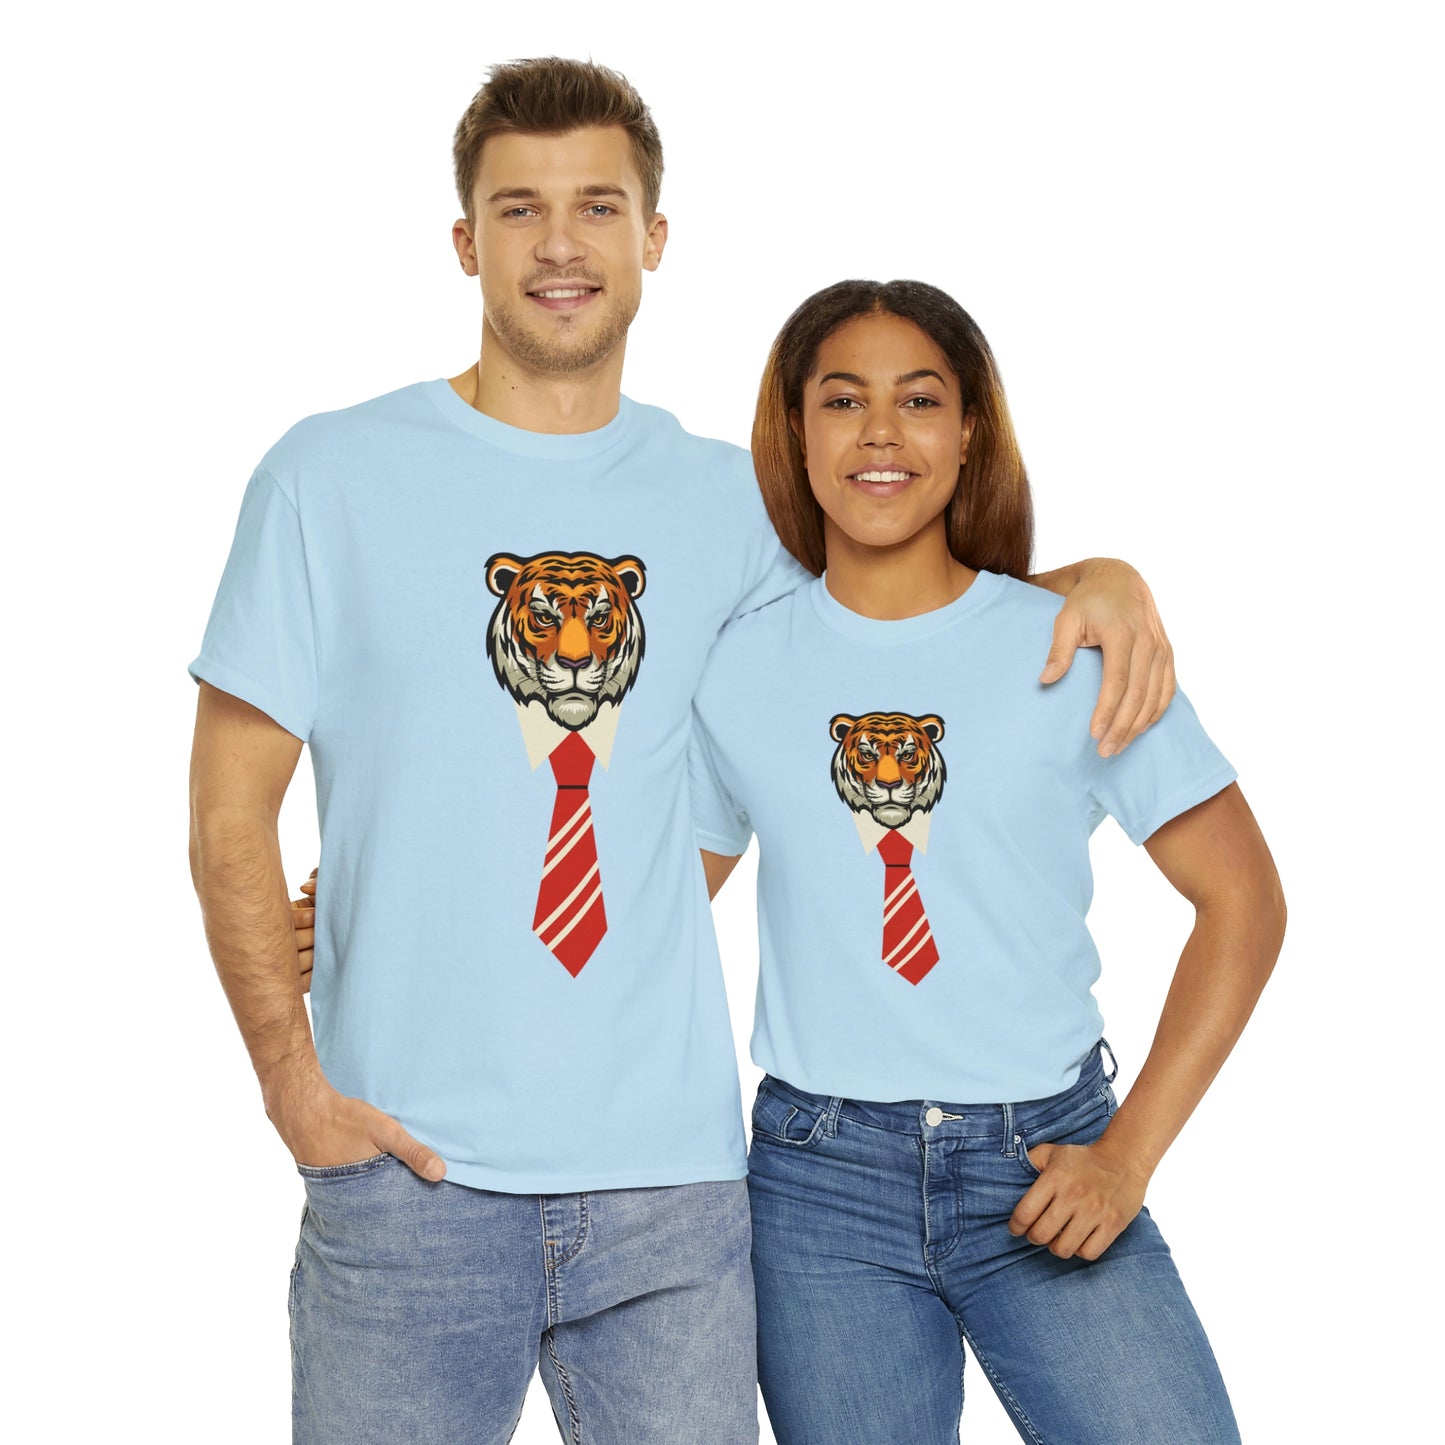 Tiger Tie Your Style Our Custom Printed Tee Unique Design Comfortable Fit Personalized for You color, funny tshirt tee shirt motivation